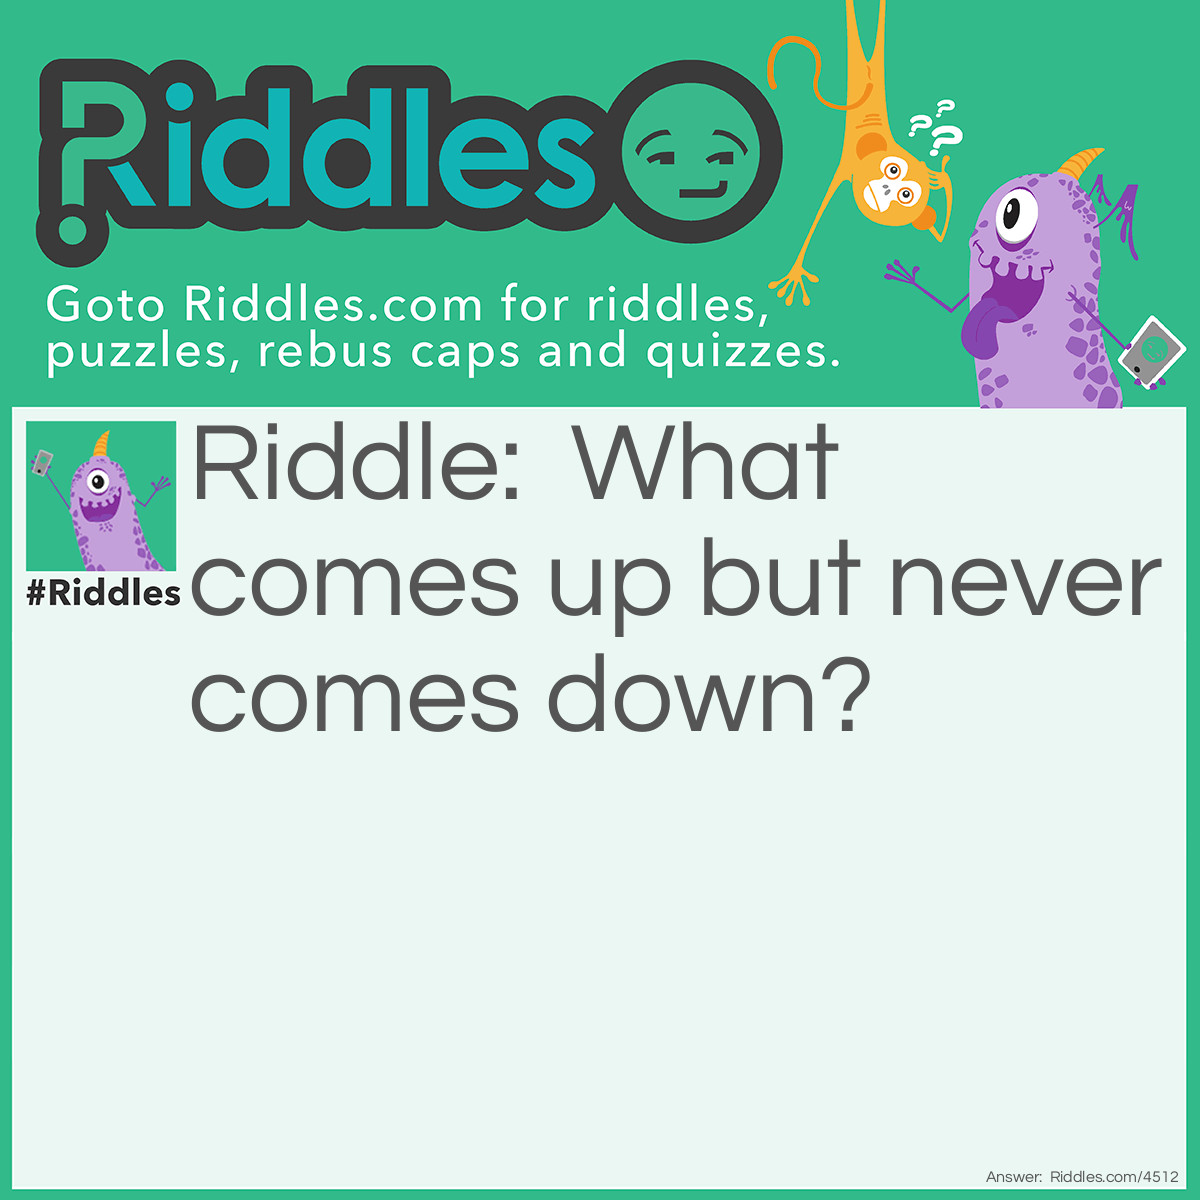 Riddle: What comes up but never comes down? Answer: Age.